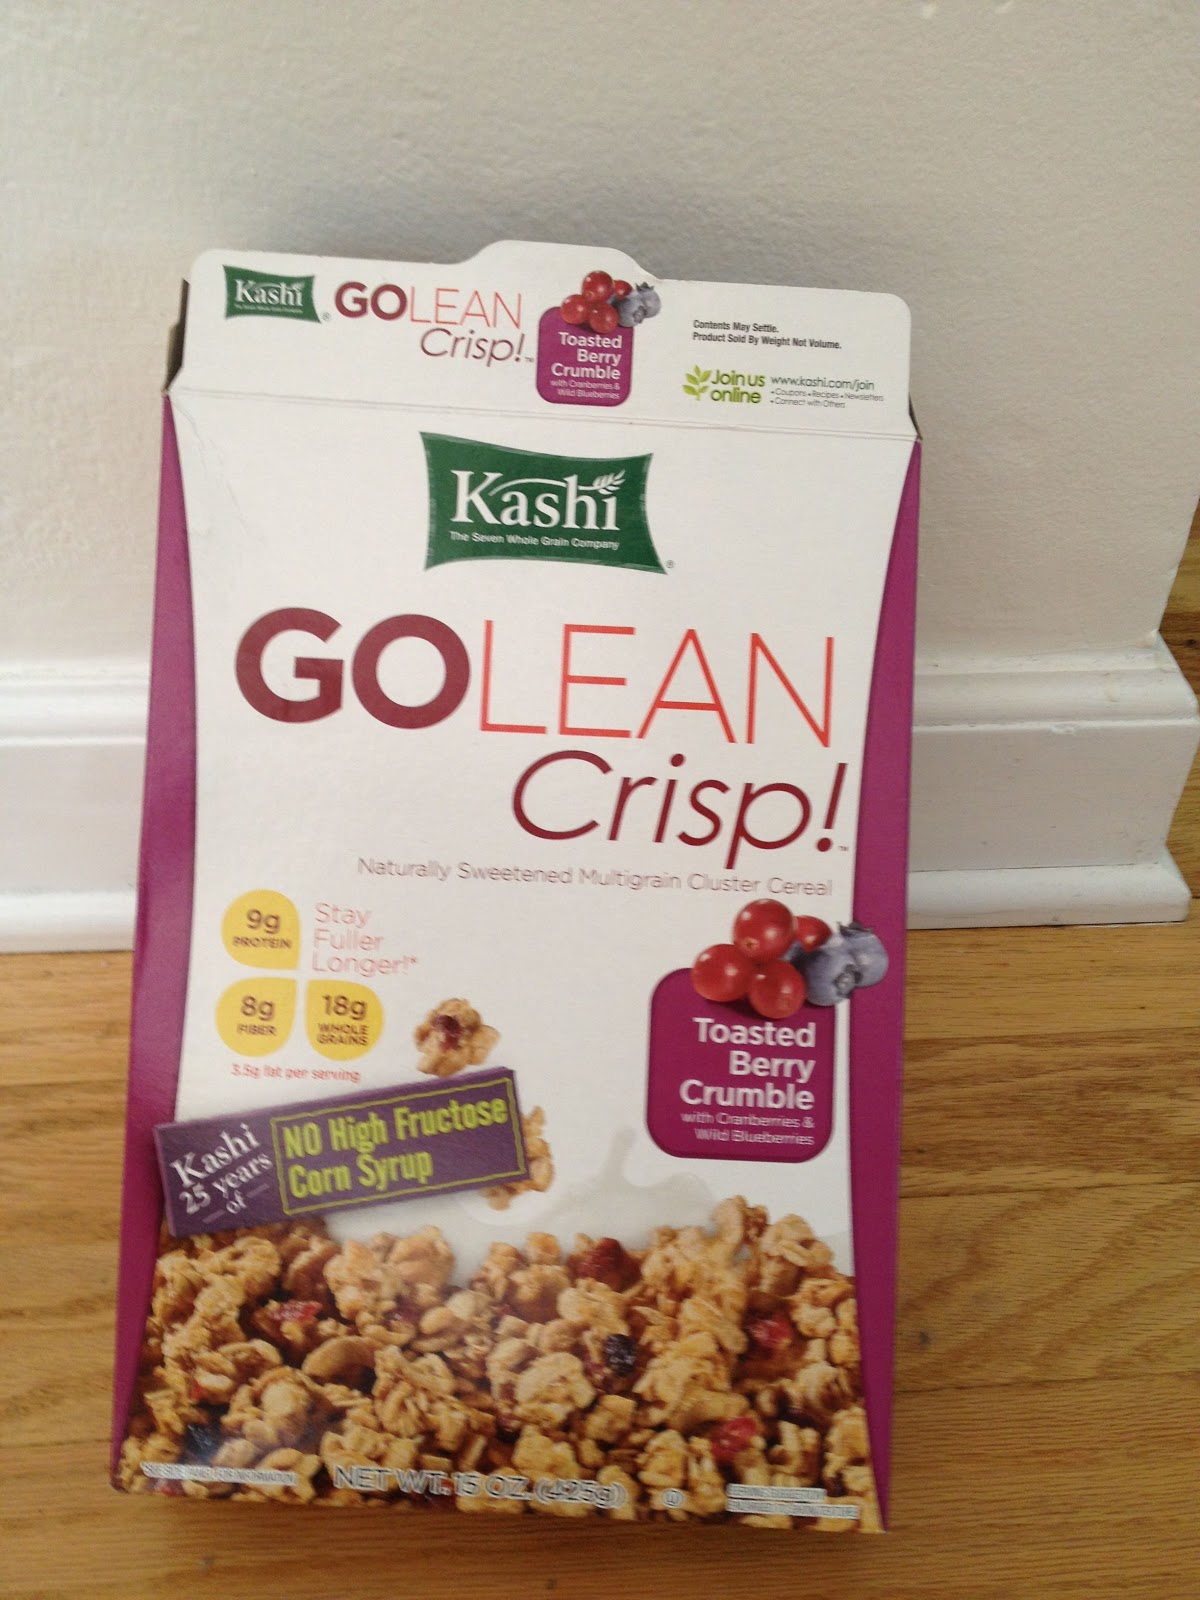 The Cereal Cellar: Kashi GoLean Crisp! Toasted Berry Crumble